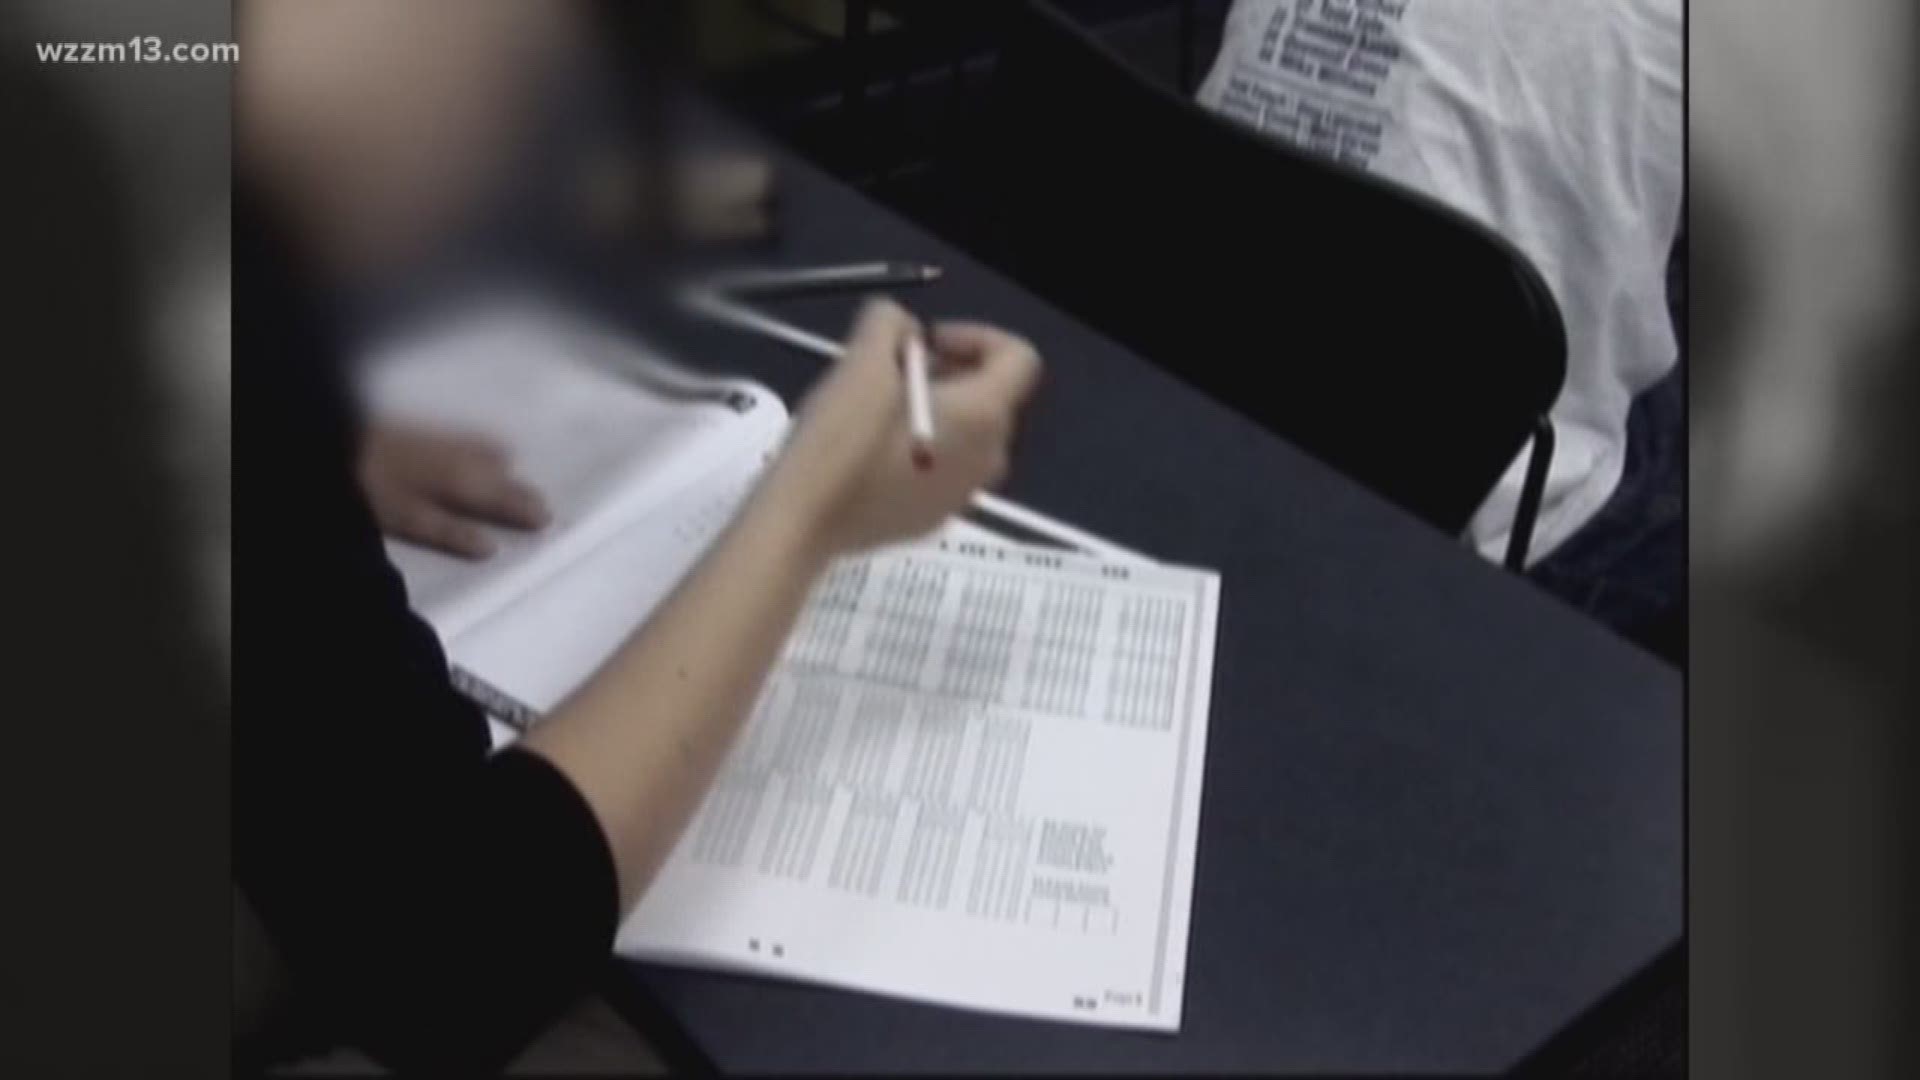 Changes coming to state testing